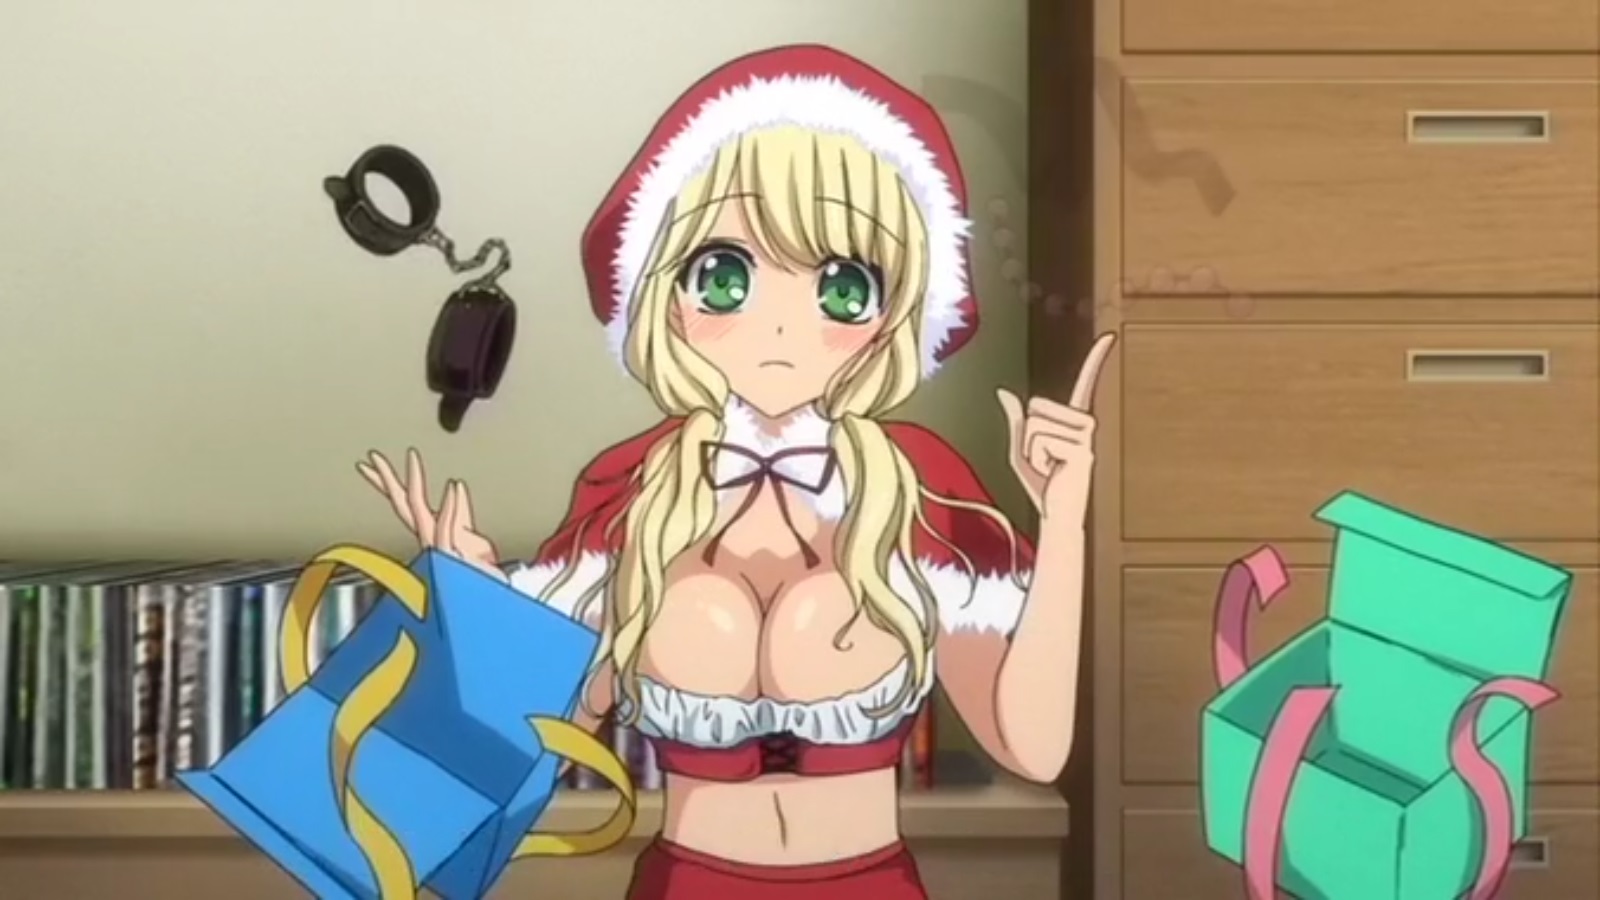 1600px x 900px - Big Tits Blonde Miss Hentai Video Santa - HentaiVideo.tv